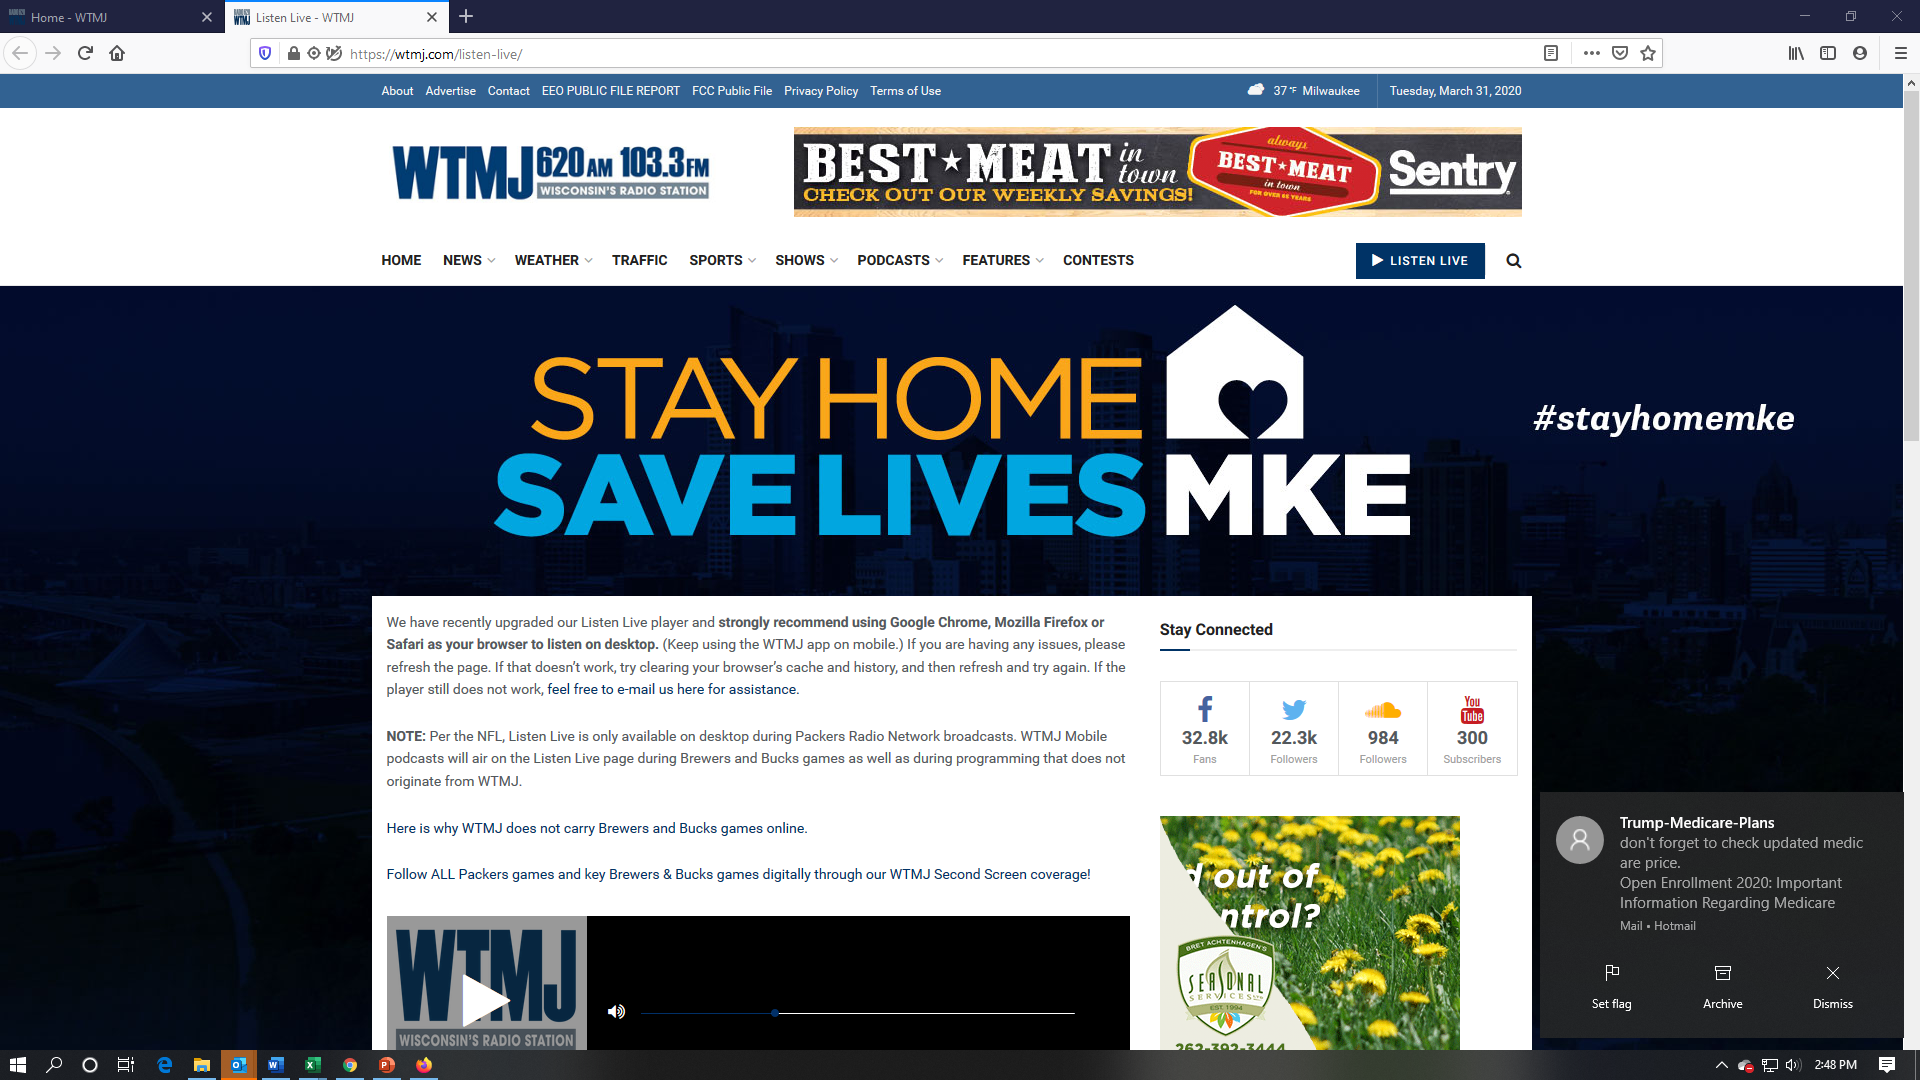 WTMJ-AM Stay hOME mke wallpaper (1).png